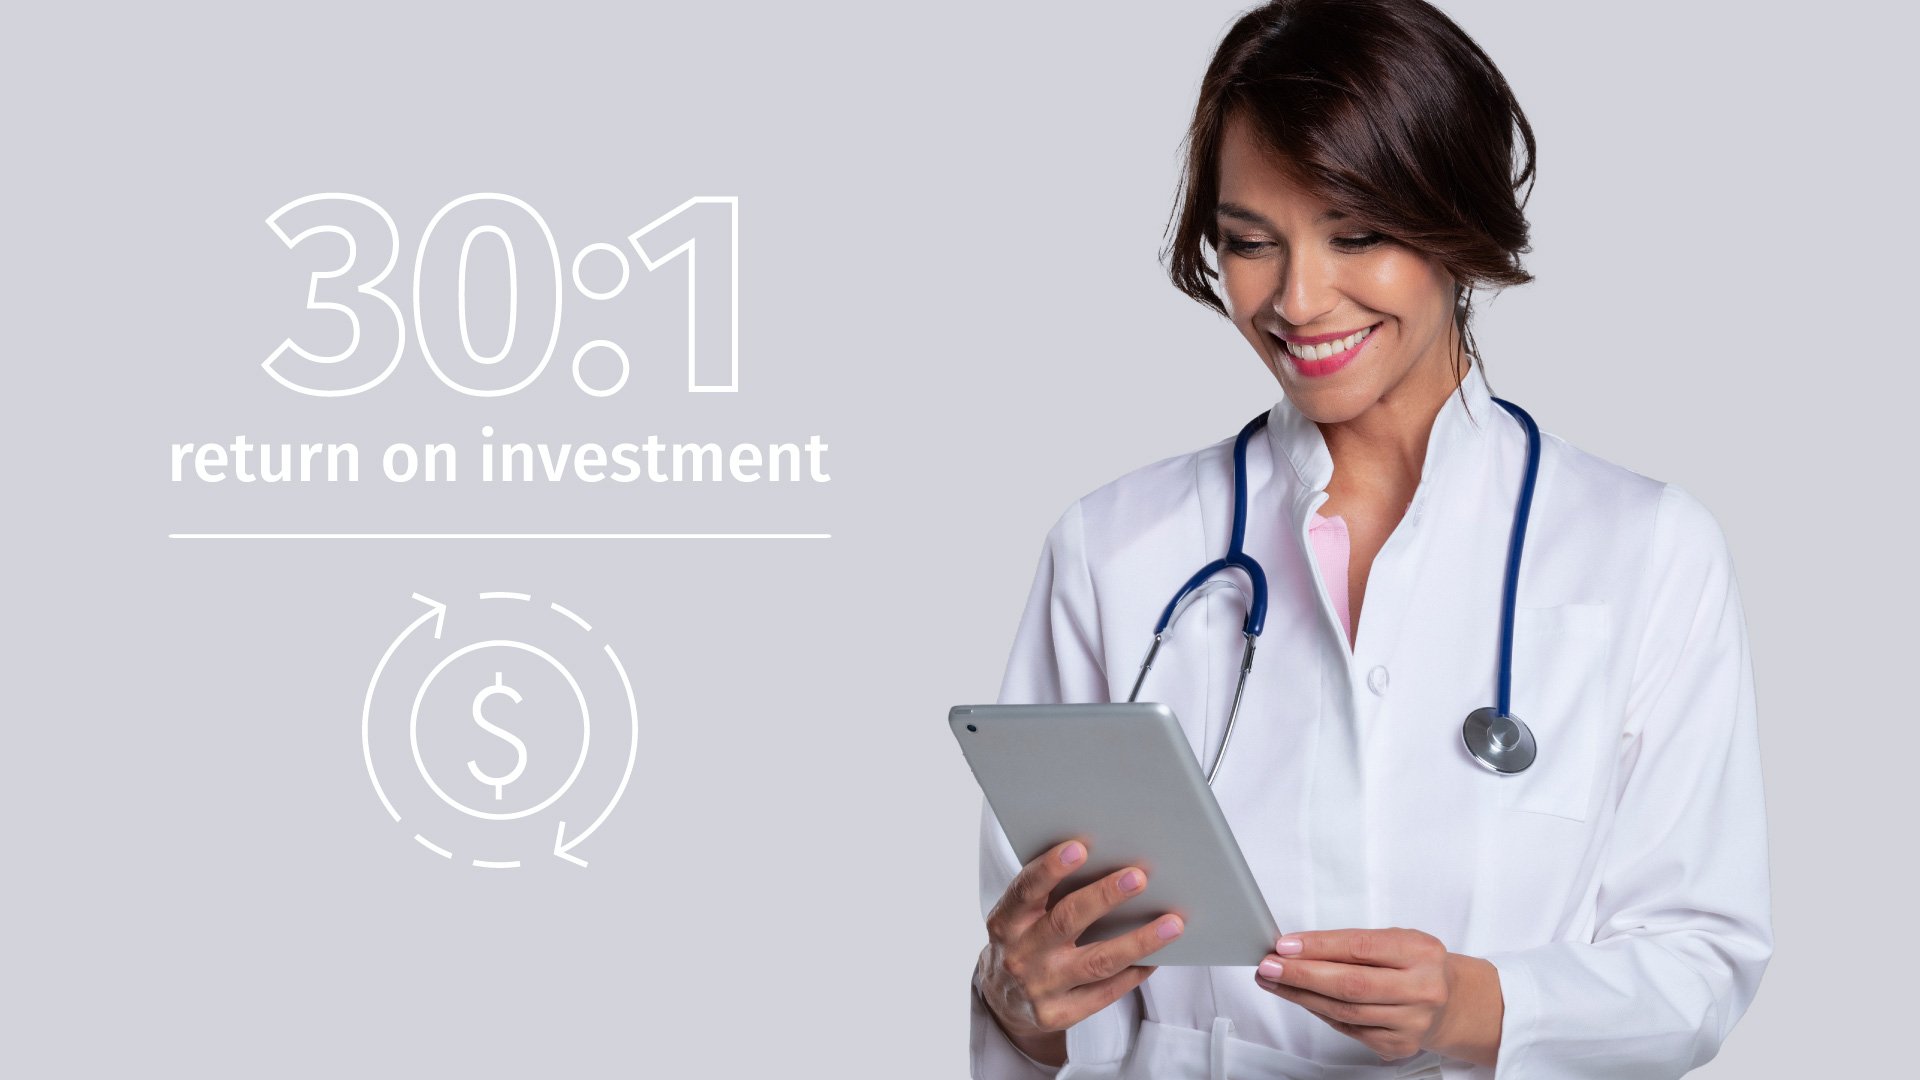 30:1 return on investment physician holding ipad